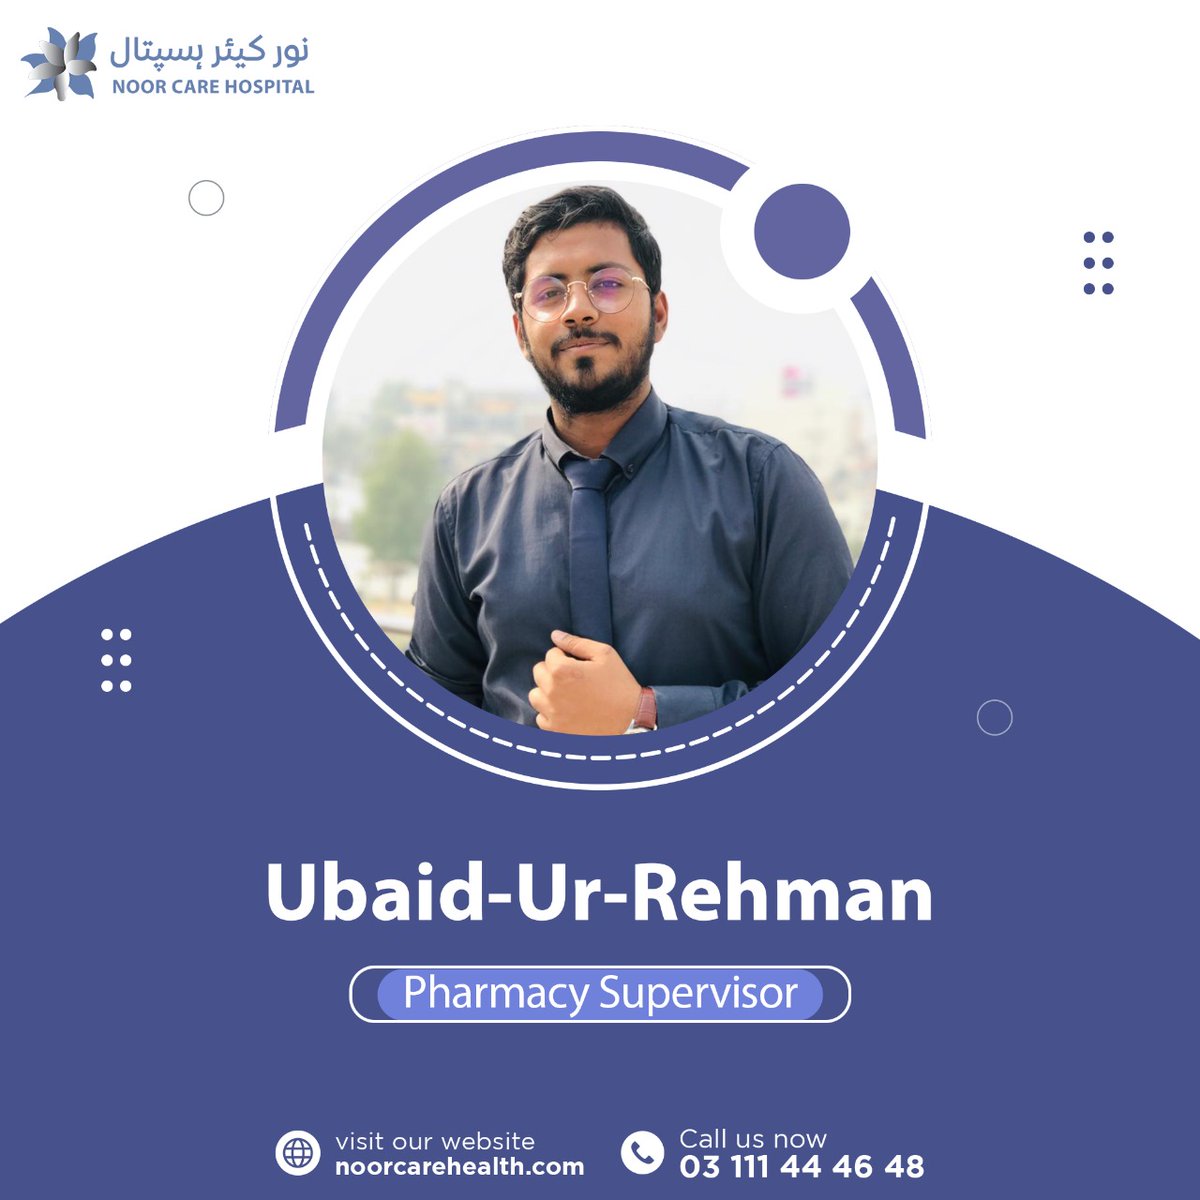 Meet our exceptionally talented team of healthcare workers at Noor Care Hospital, #Rajanpur. Ubaid-ur-Rehman is a young, energetic and highly ambitious resource with lots of potential. 

We're Growing!

#HealthcareTeam #team #Health #digitalhealth #thursdaymorning #noorcare